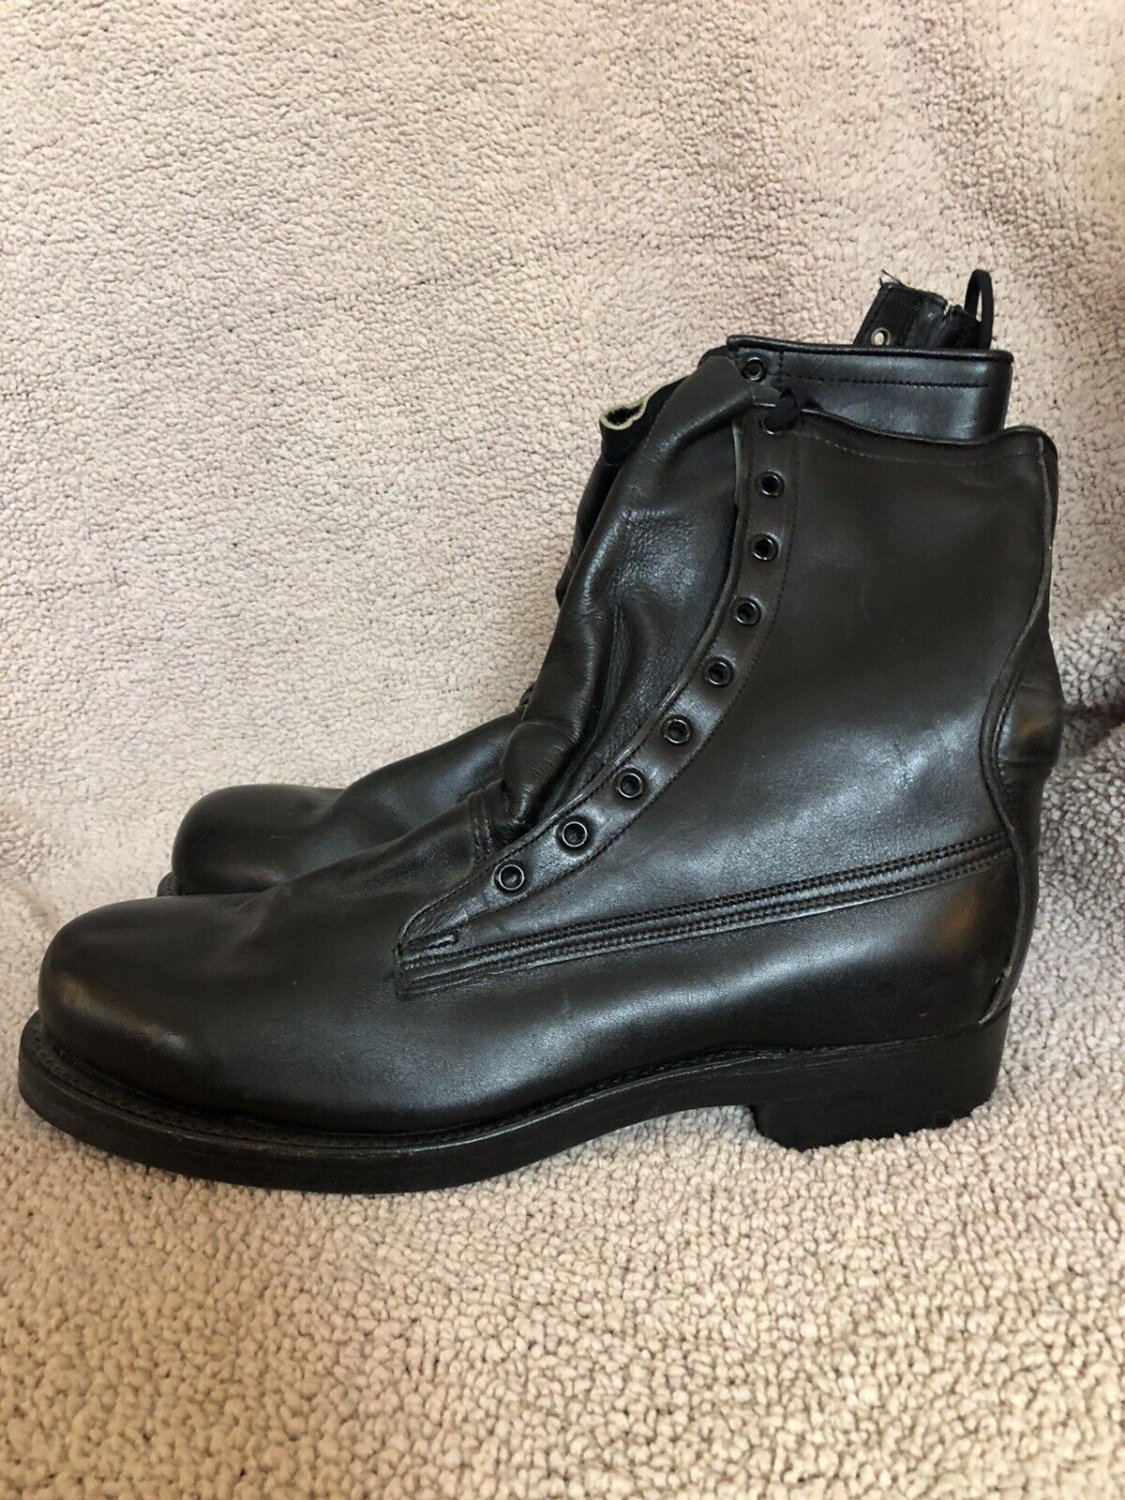 Vintage BF Goodrich Black Leather Military Motorcycle Boots Size 9C